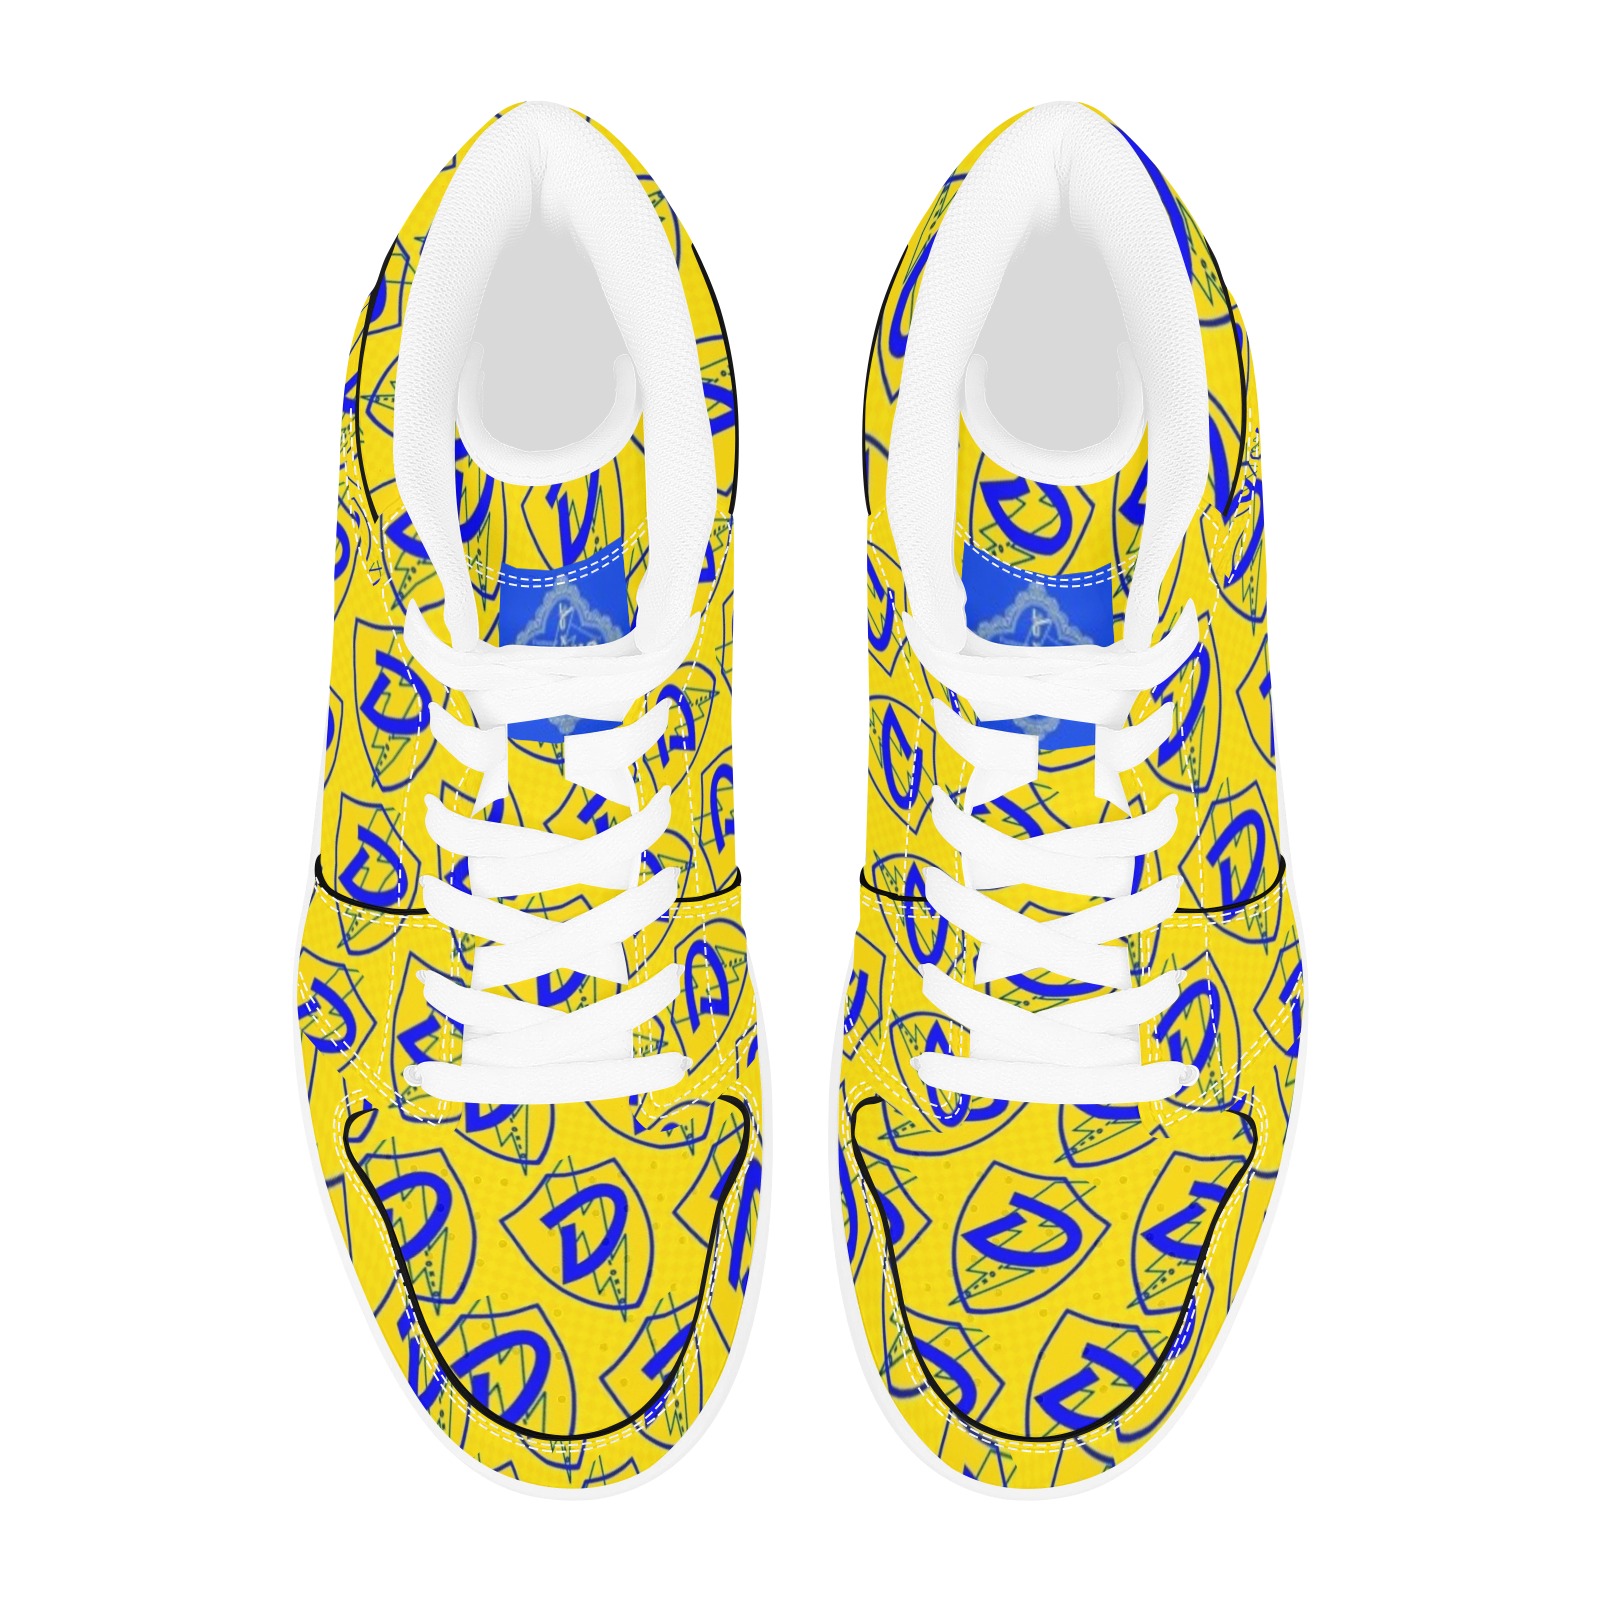 DIONIO - Yellow & Blue Repeat High-Top Basketball  Sneakers (Yellow & Blue D Shield Logo) Unisex High Top Sneakers (Model 20042)